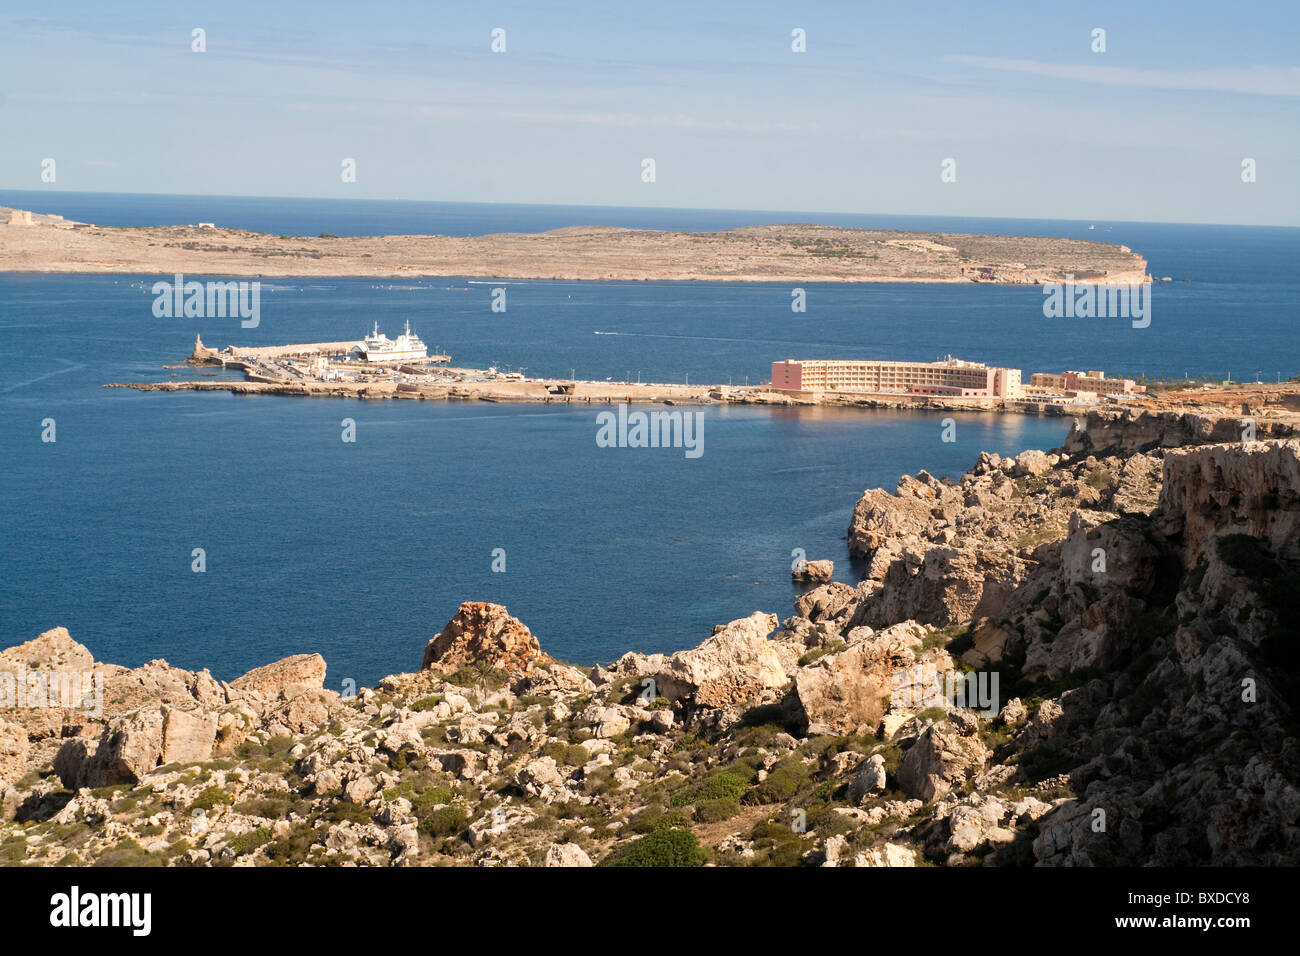 View over Cirkewwa, North West Malta with the island of Comino behind from Paradise Bay Stock Photo